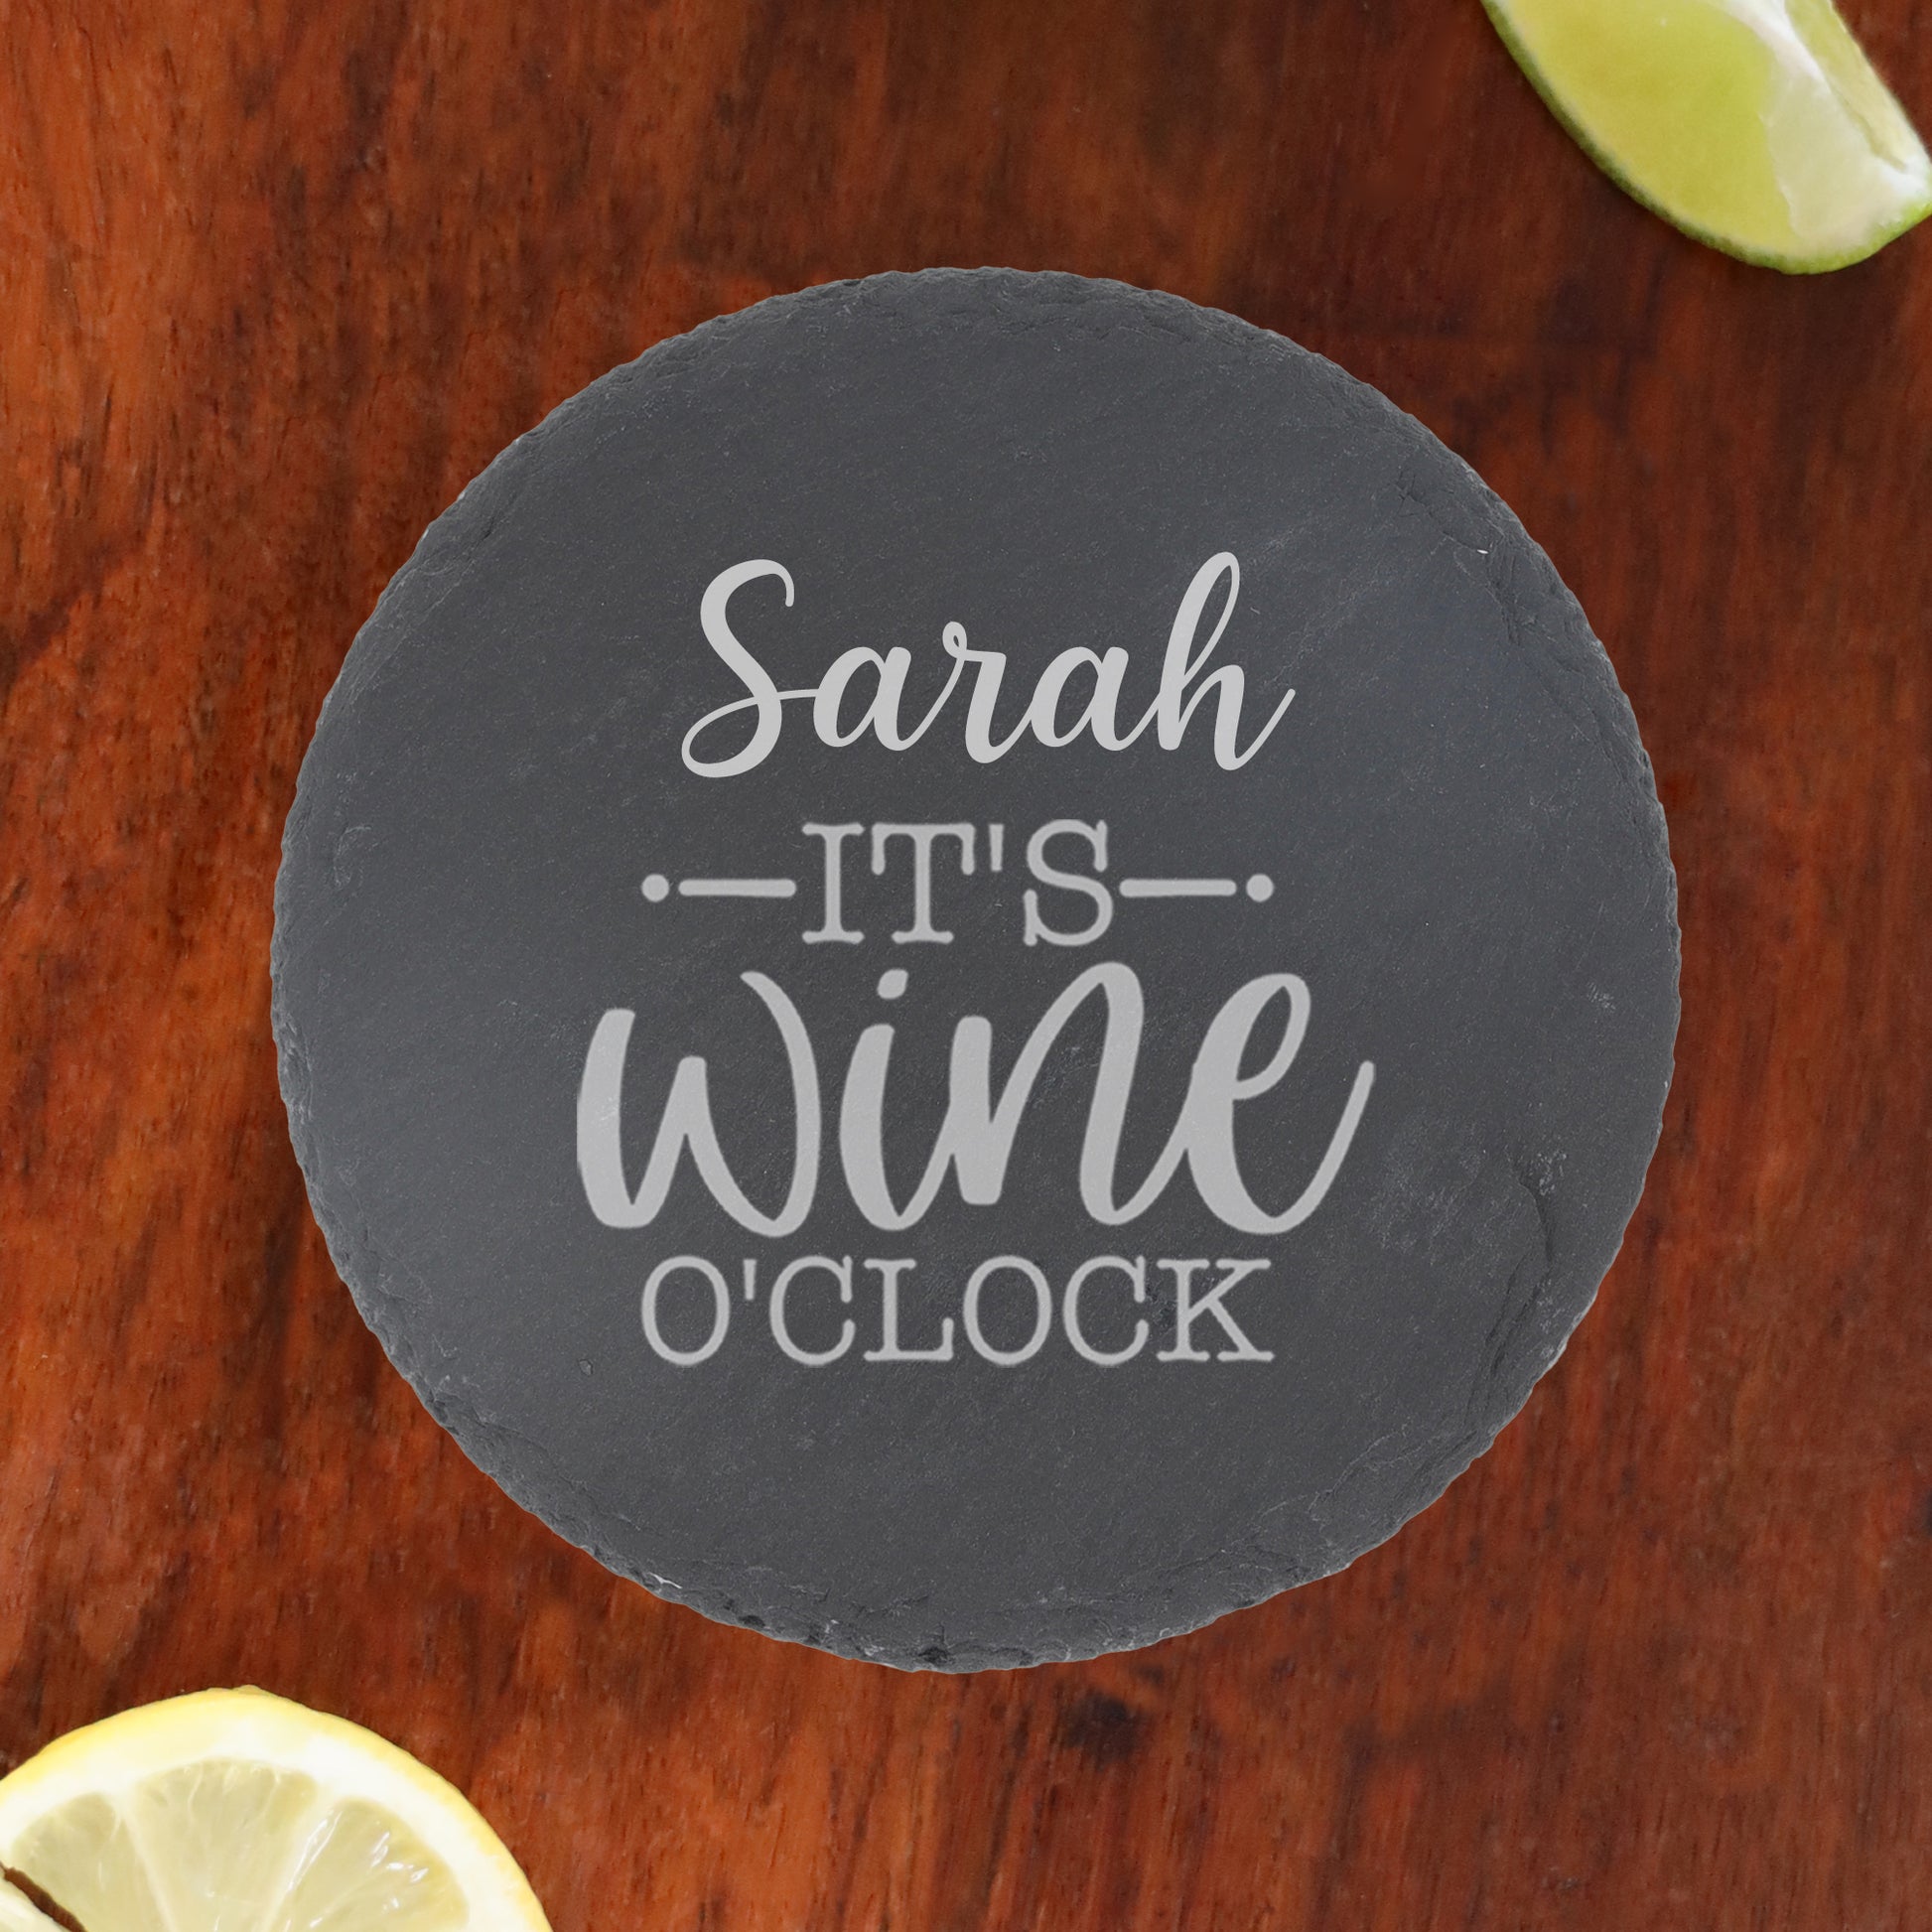 Personalised Wine O'clock Engraved Wine Glass and/or Coaster Gift Set  - Always Looking Good -   